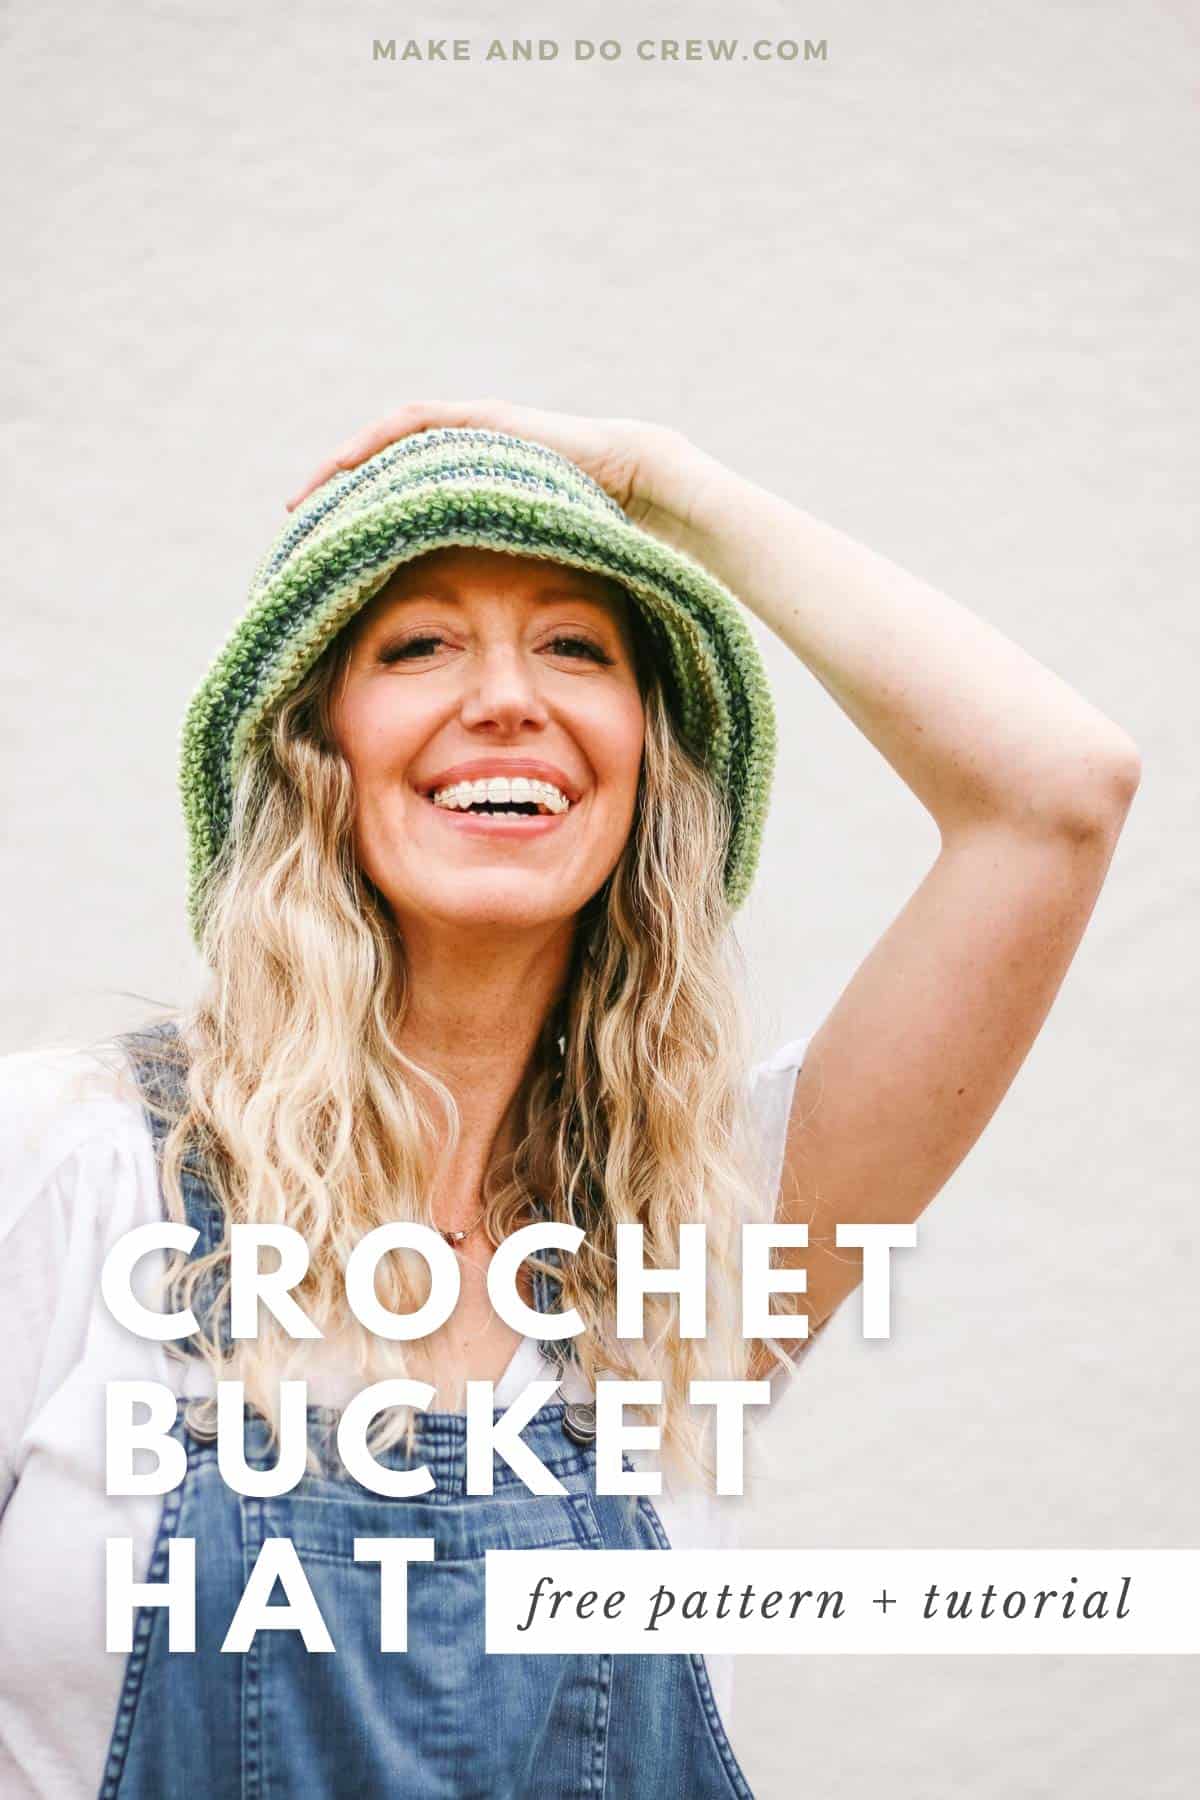 This image shows a woman with blond hair looking at the camera and laughing. She is wearing a green striped crochet bucket hat and her hand is on her head.